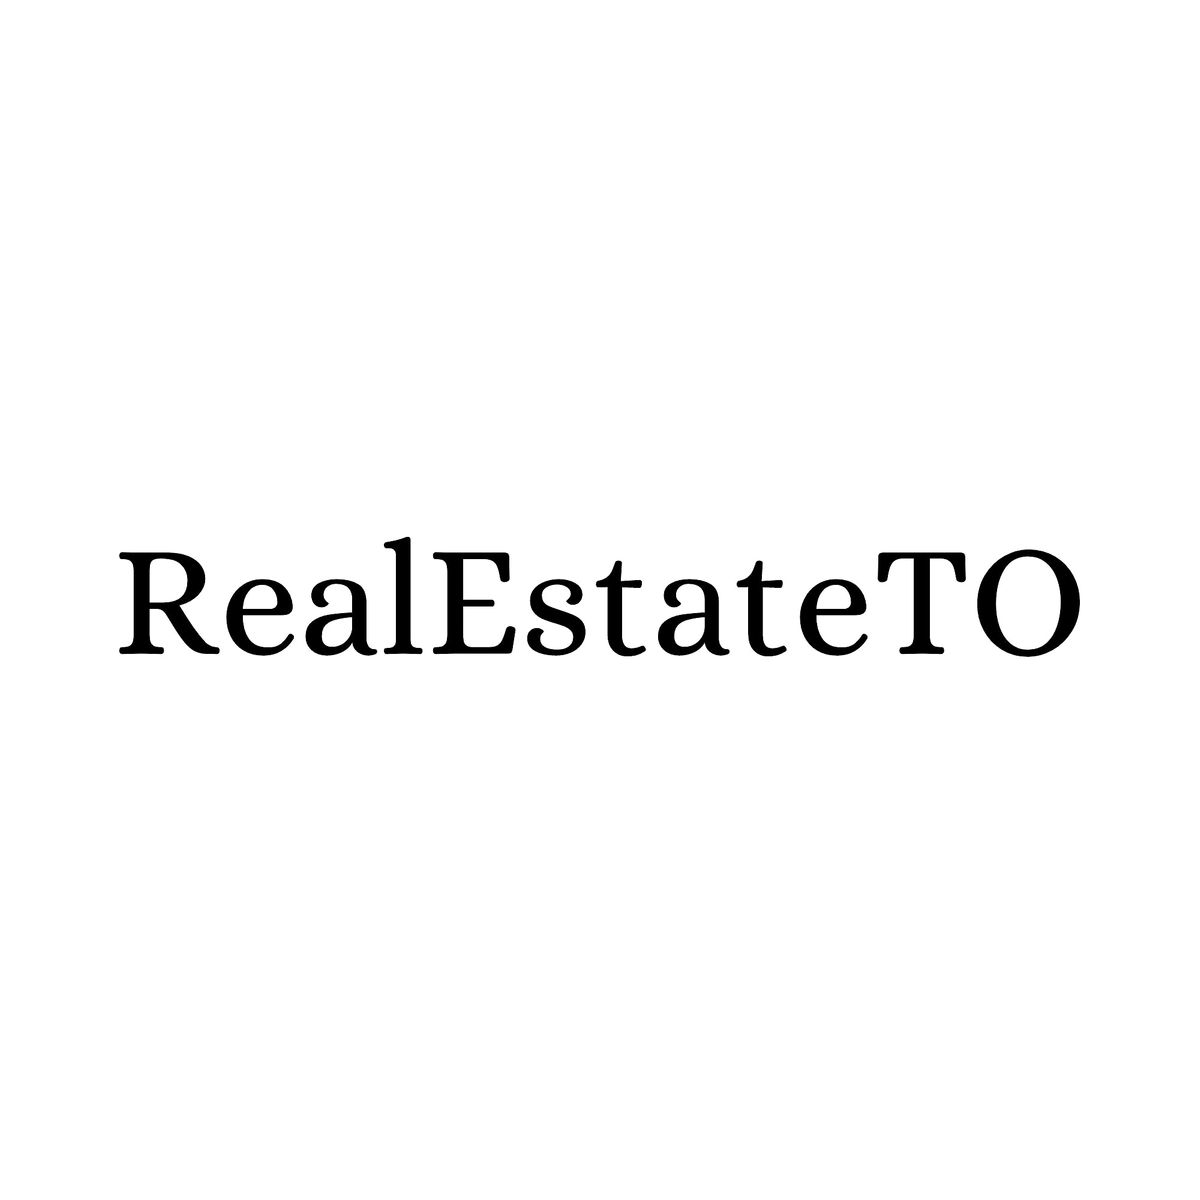 RealEstateTO 7: "How to Find and Keep Good Tenants"